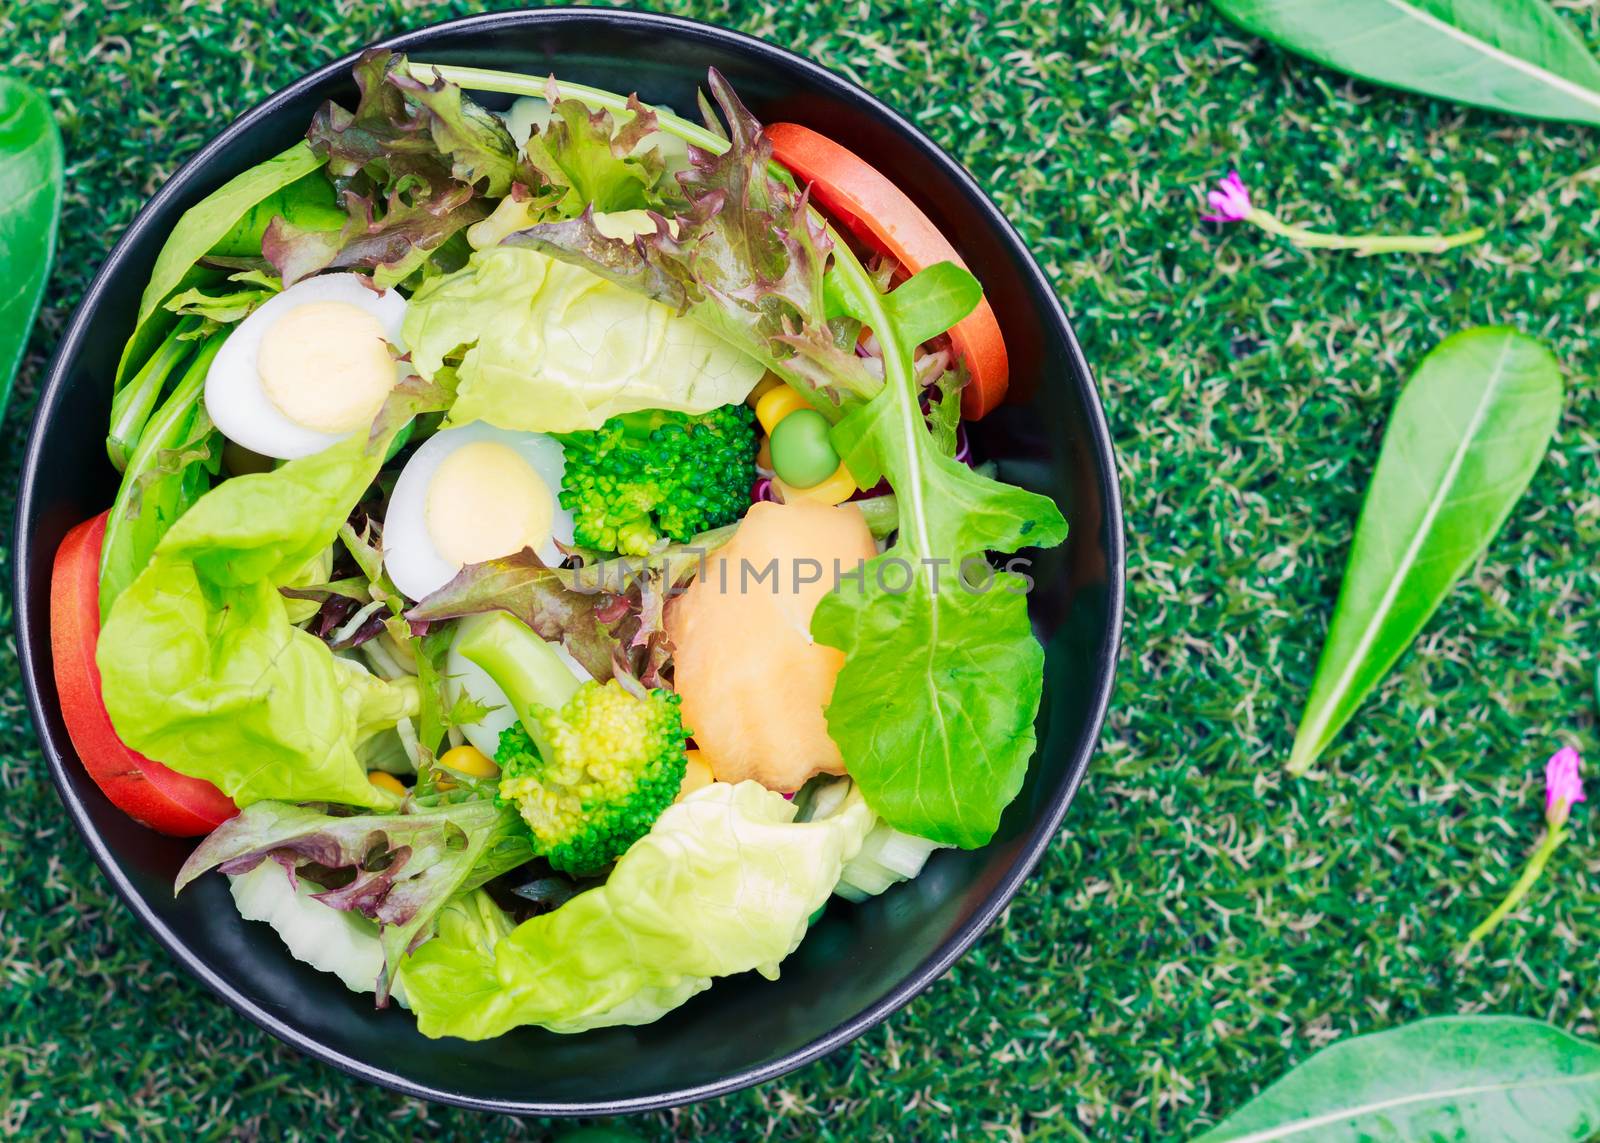 Mixed salad with quail eggs on green grass